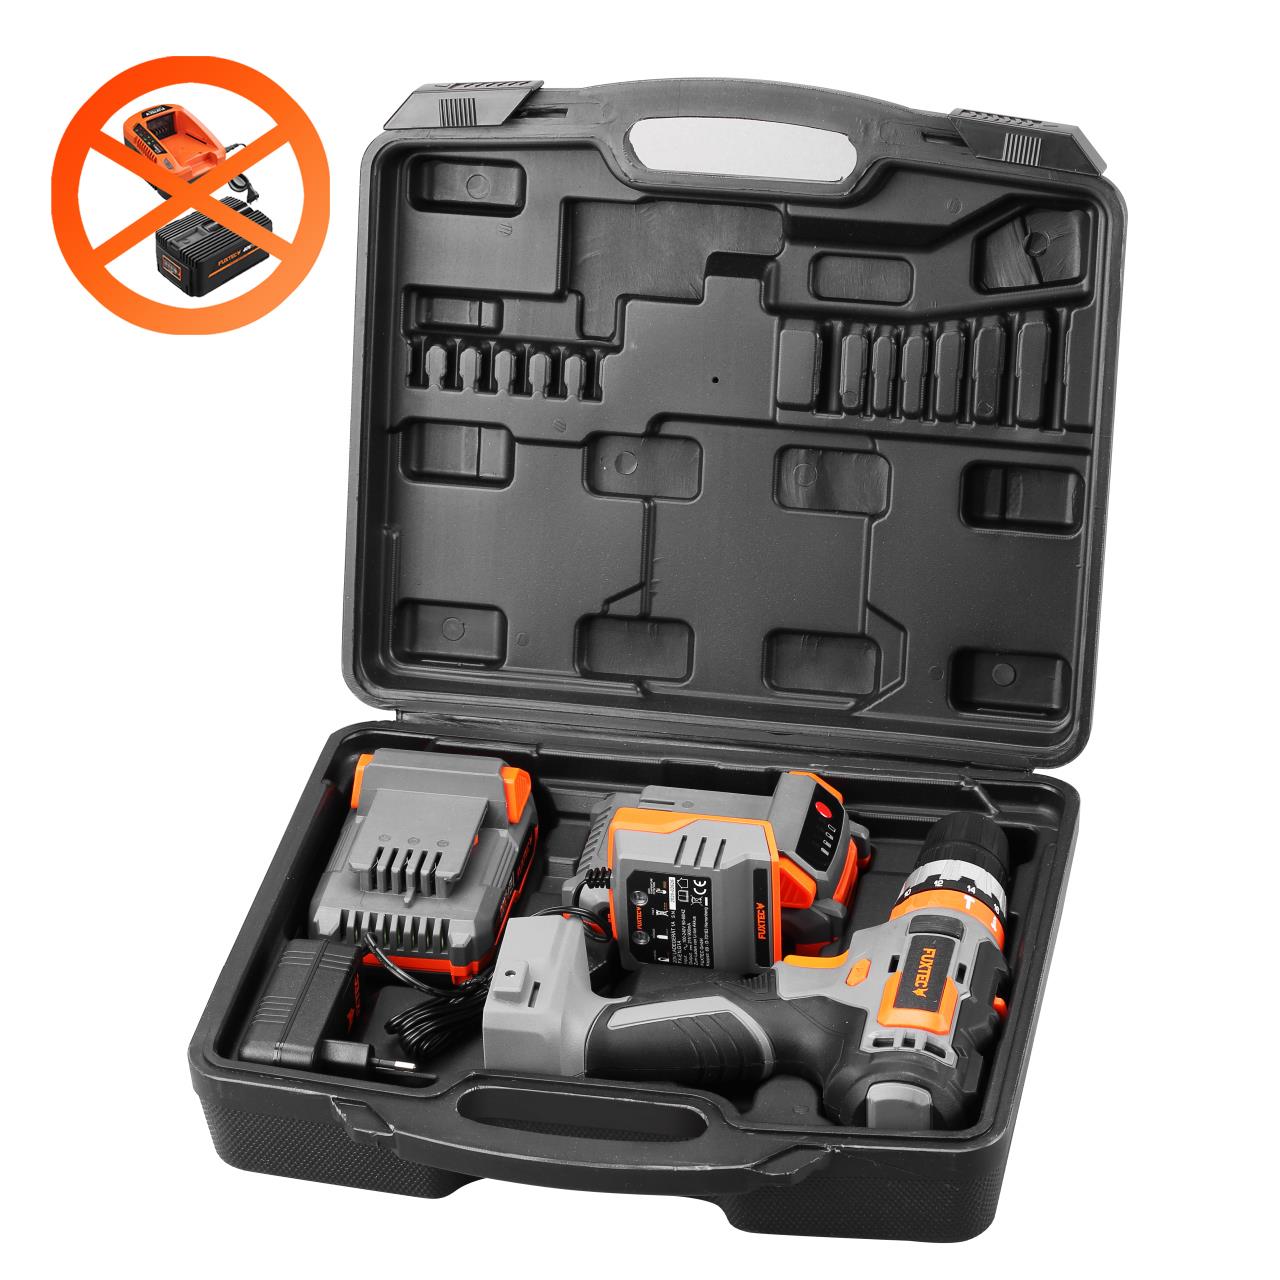 FUXTEC 20V cordless impact drill/driver - solo - E1SBS20 - no battery and charger included!